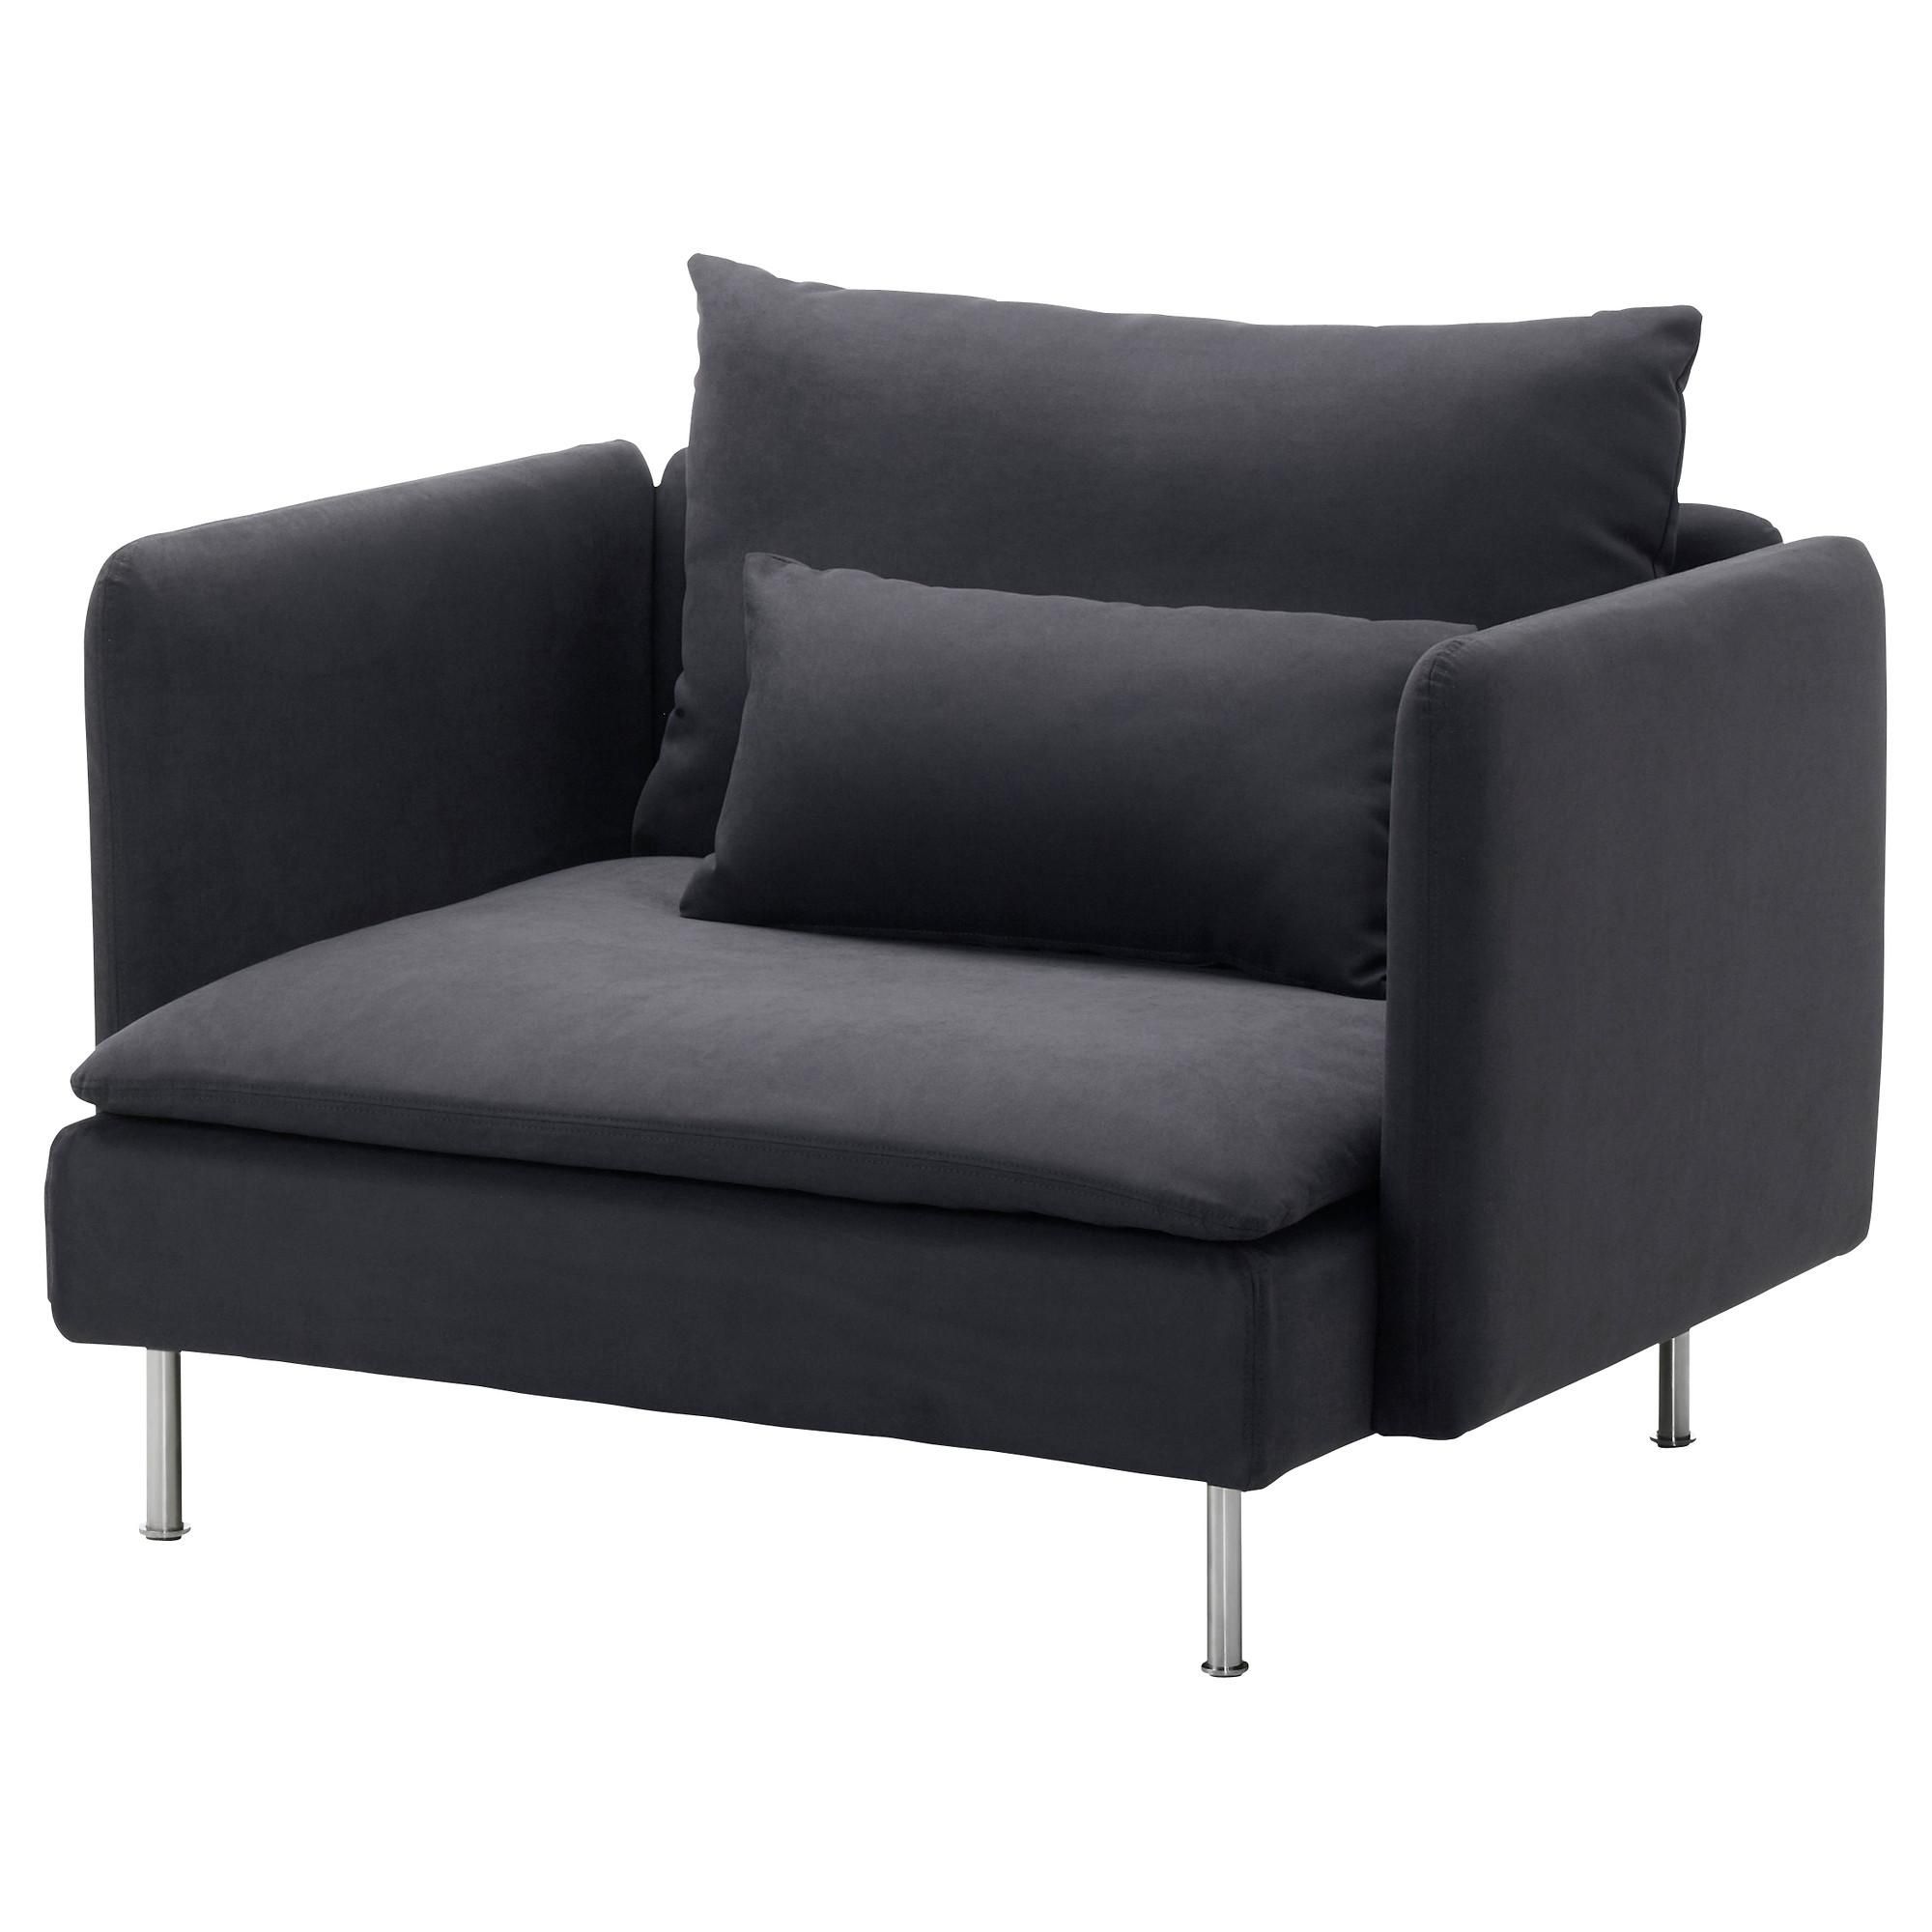 Sectional Sofas & Couches – Ikea Regarding Manstad Sofa Bed (View 15 of 20)